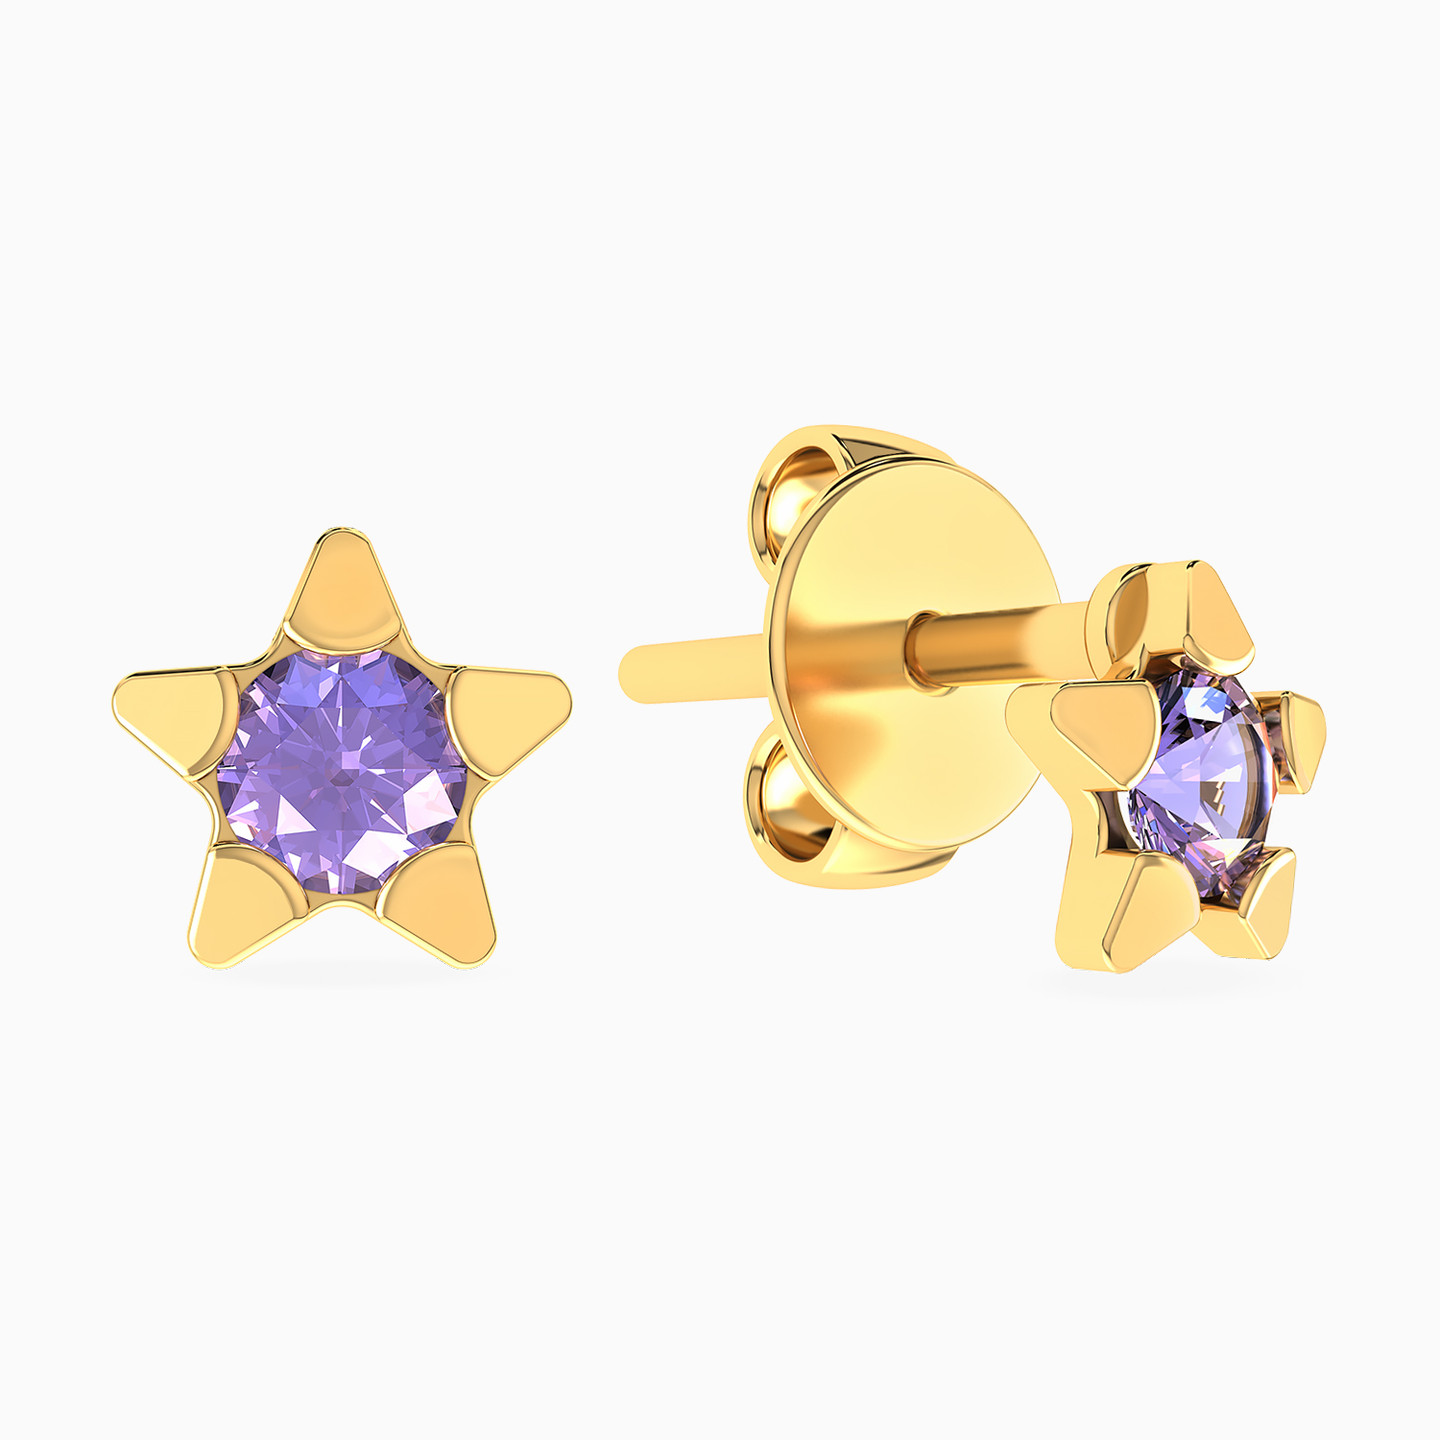 Star Shaped Colored Stones Stud Earrings in 18K Gold - 2